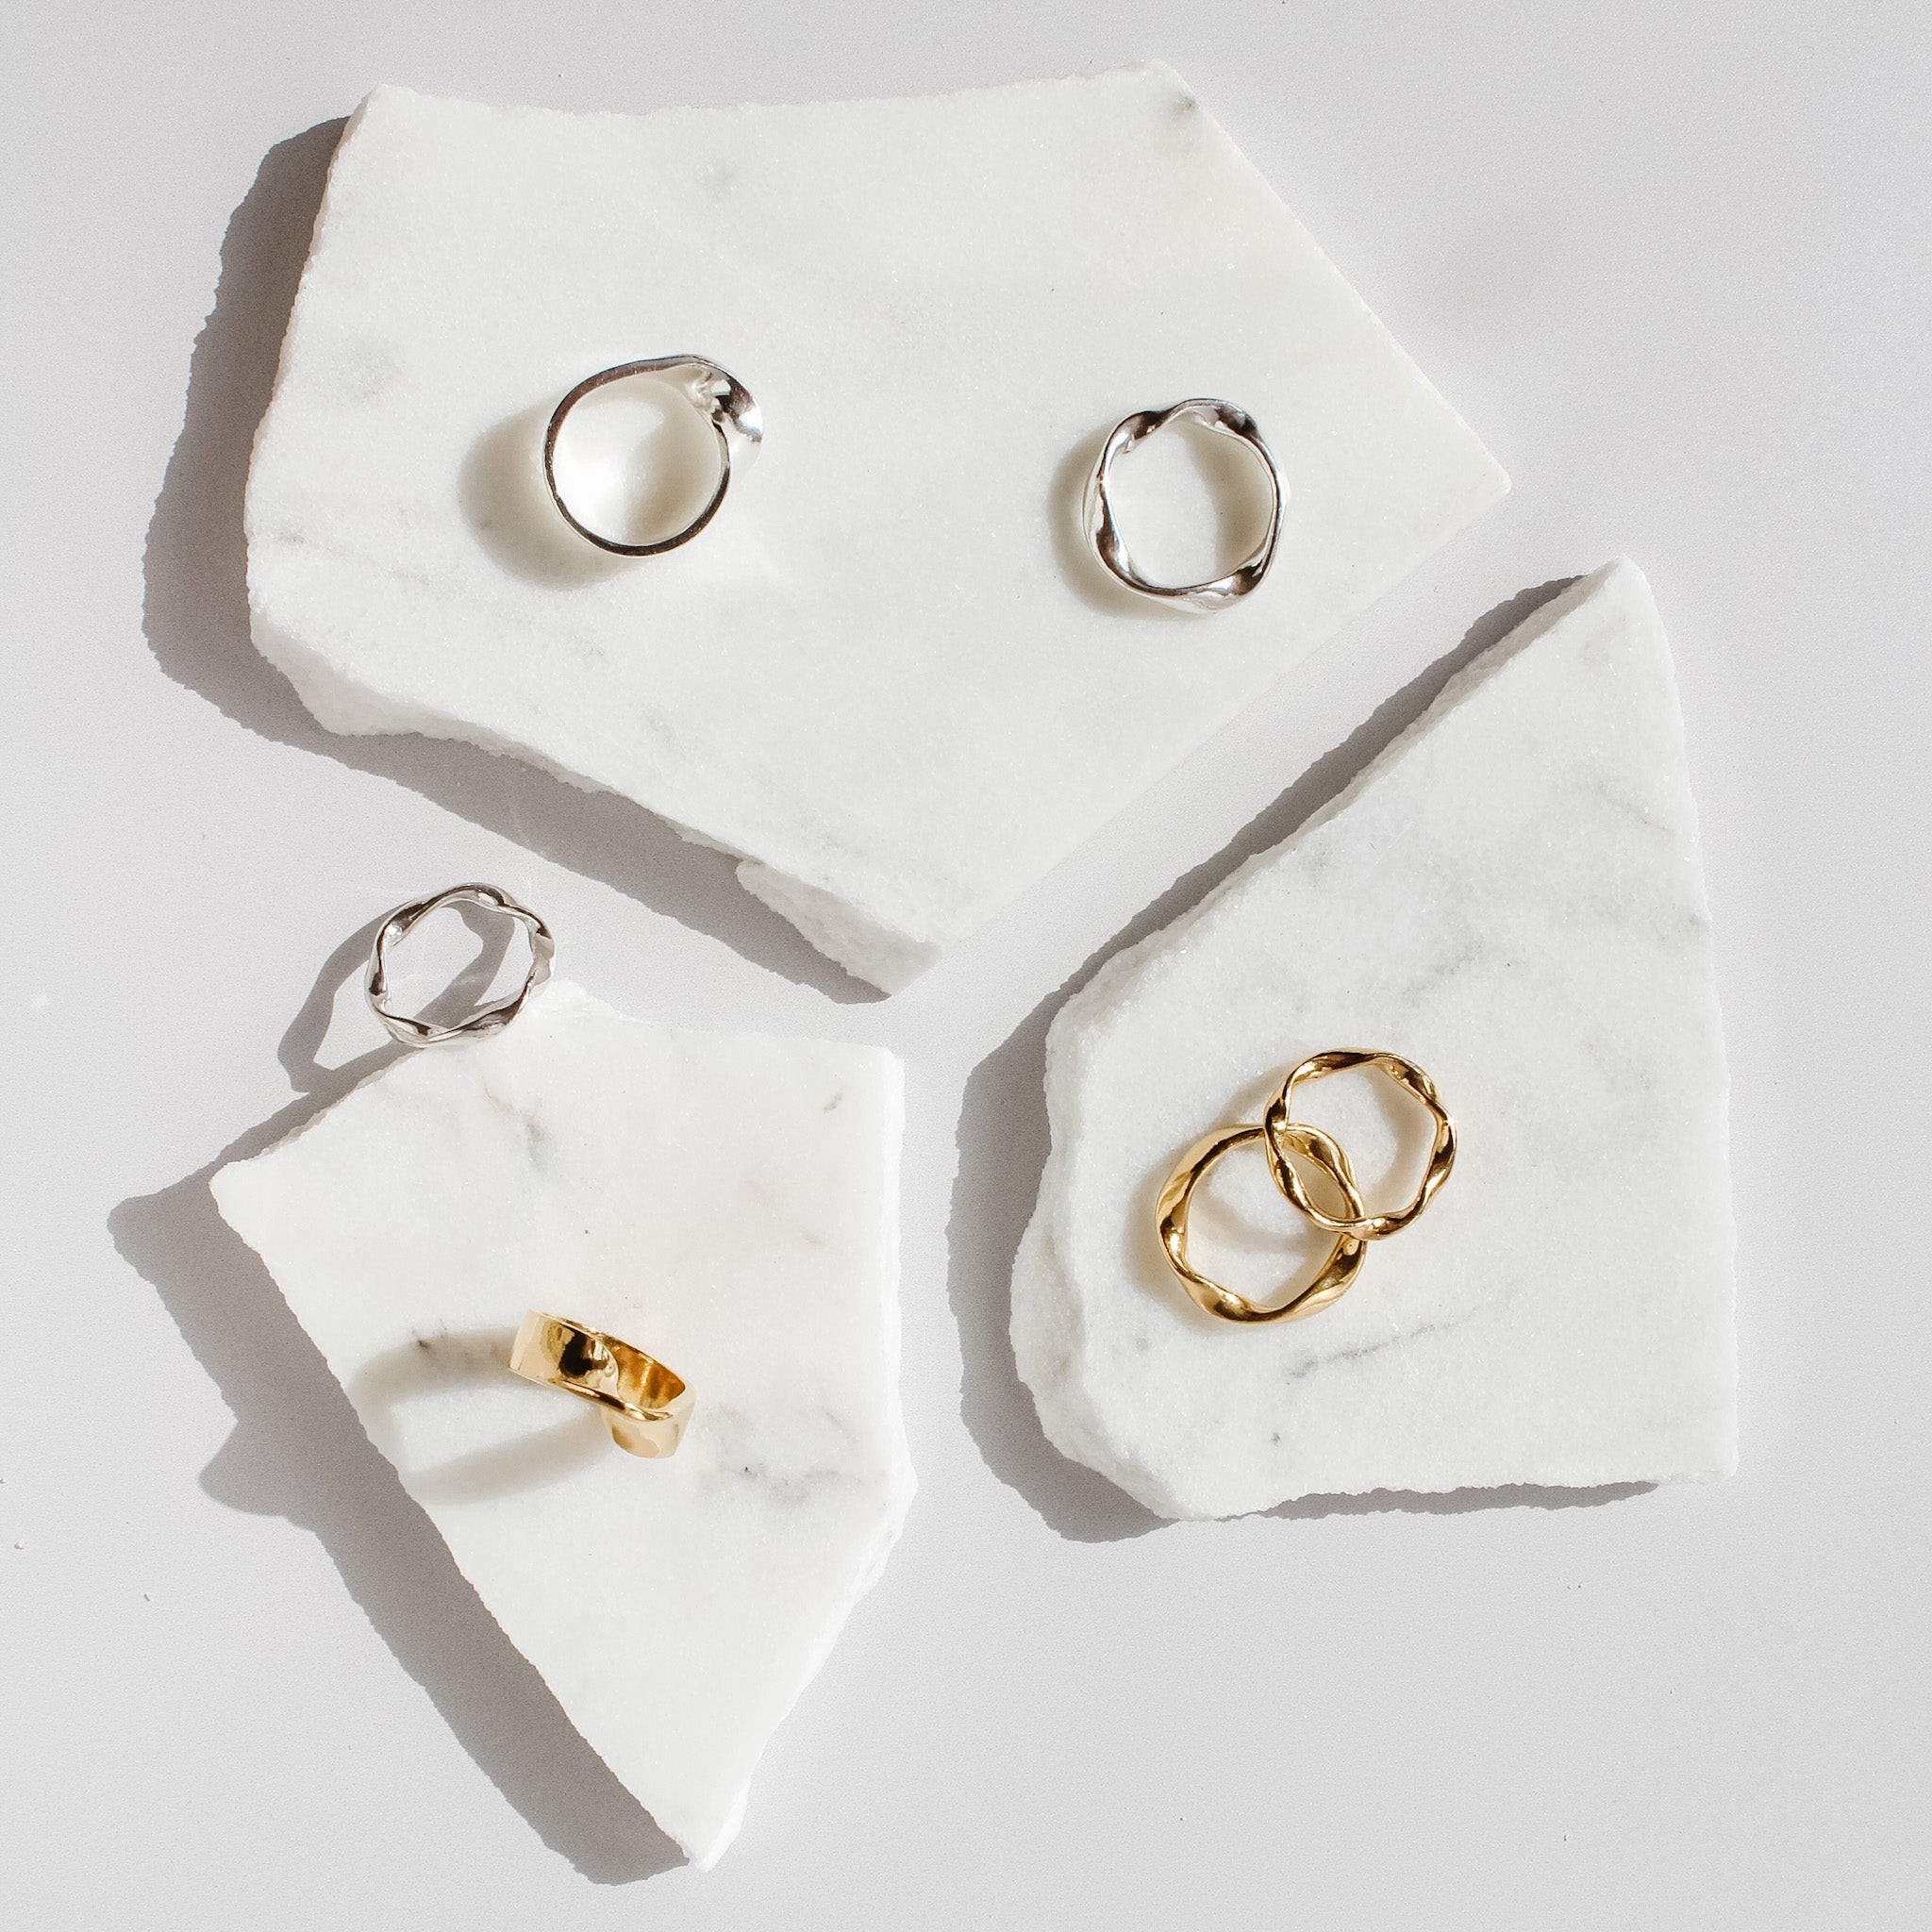 Why Is Sustainable Jewellery More Expensive?